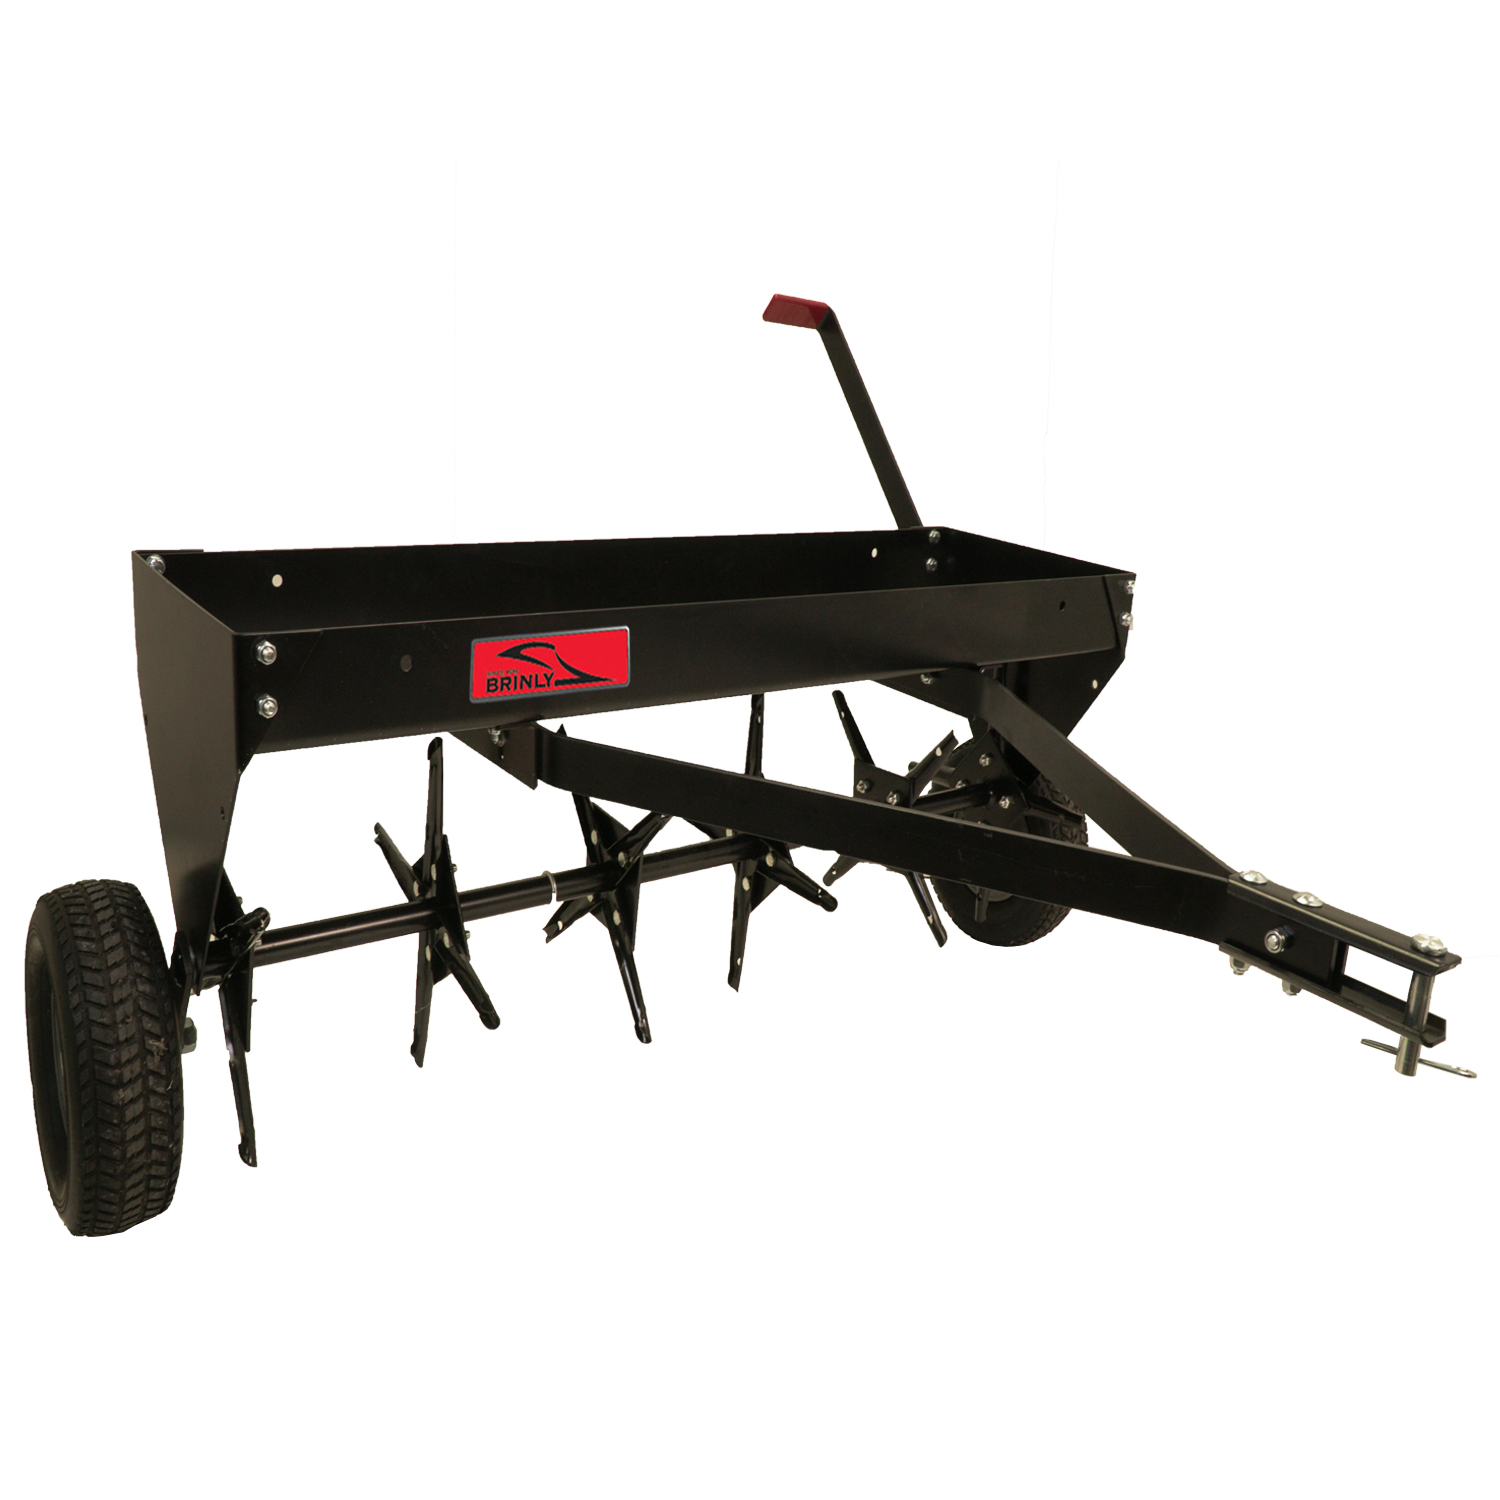 Tow-Behind Plug Aerator All Steel 40 inch Width and Steel Tray hold Up to 150lbs 